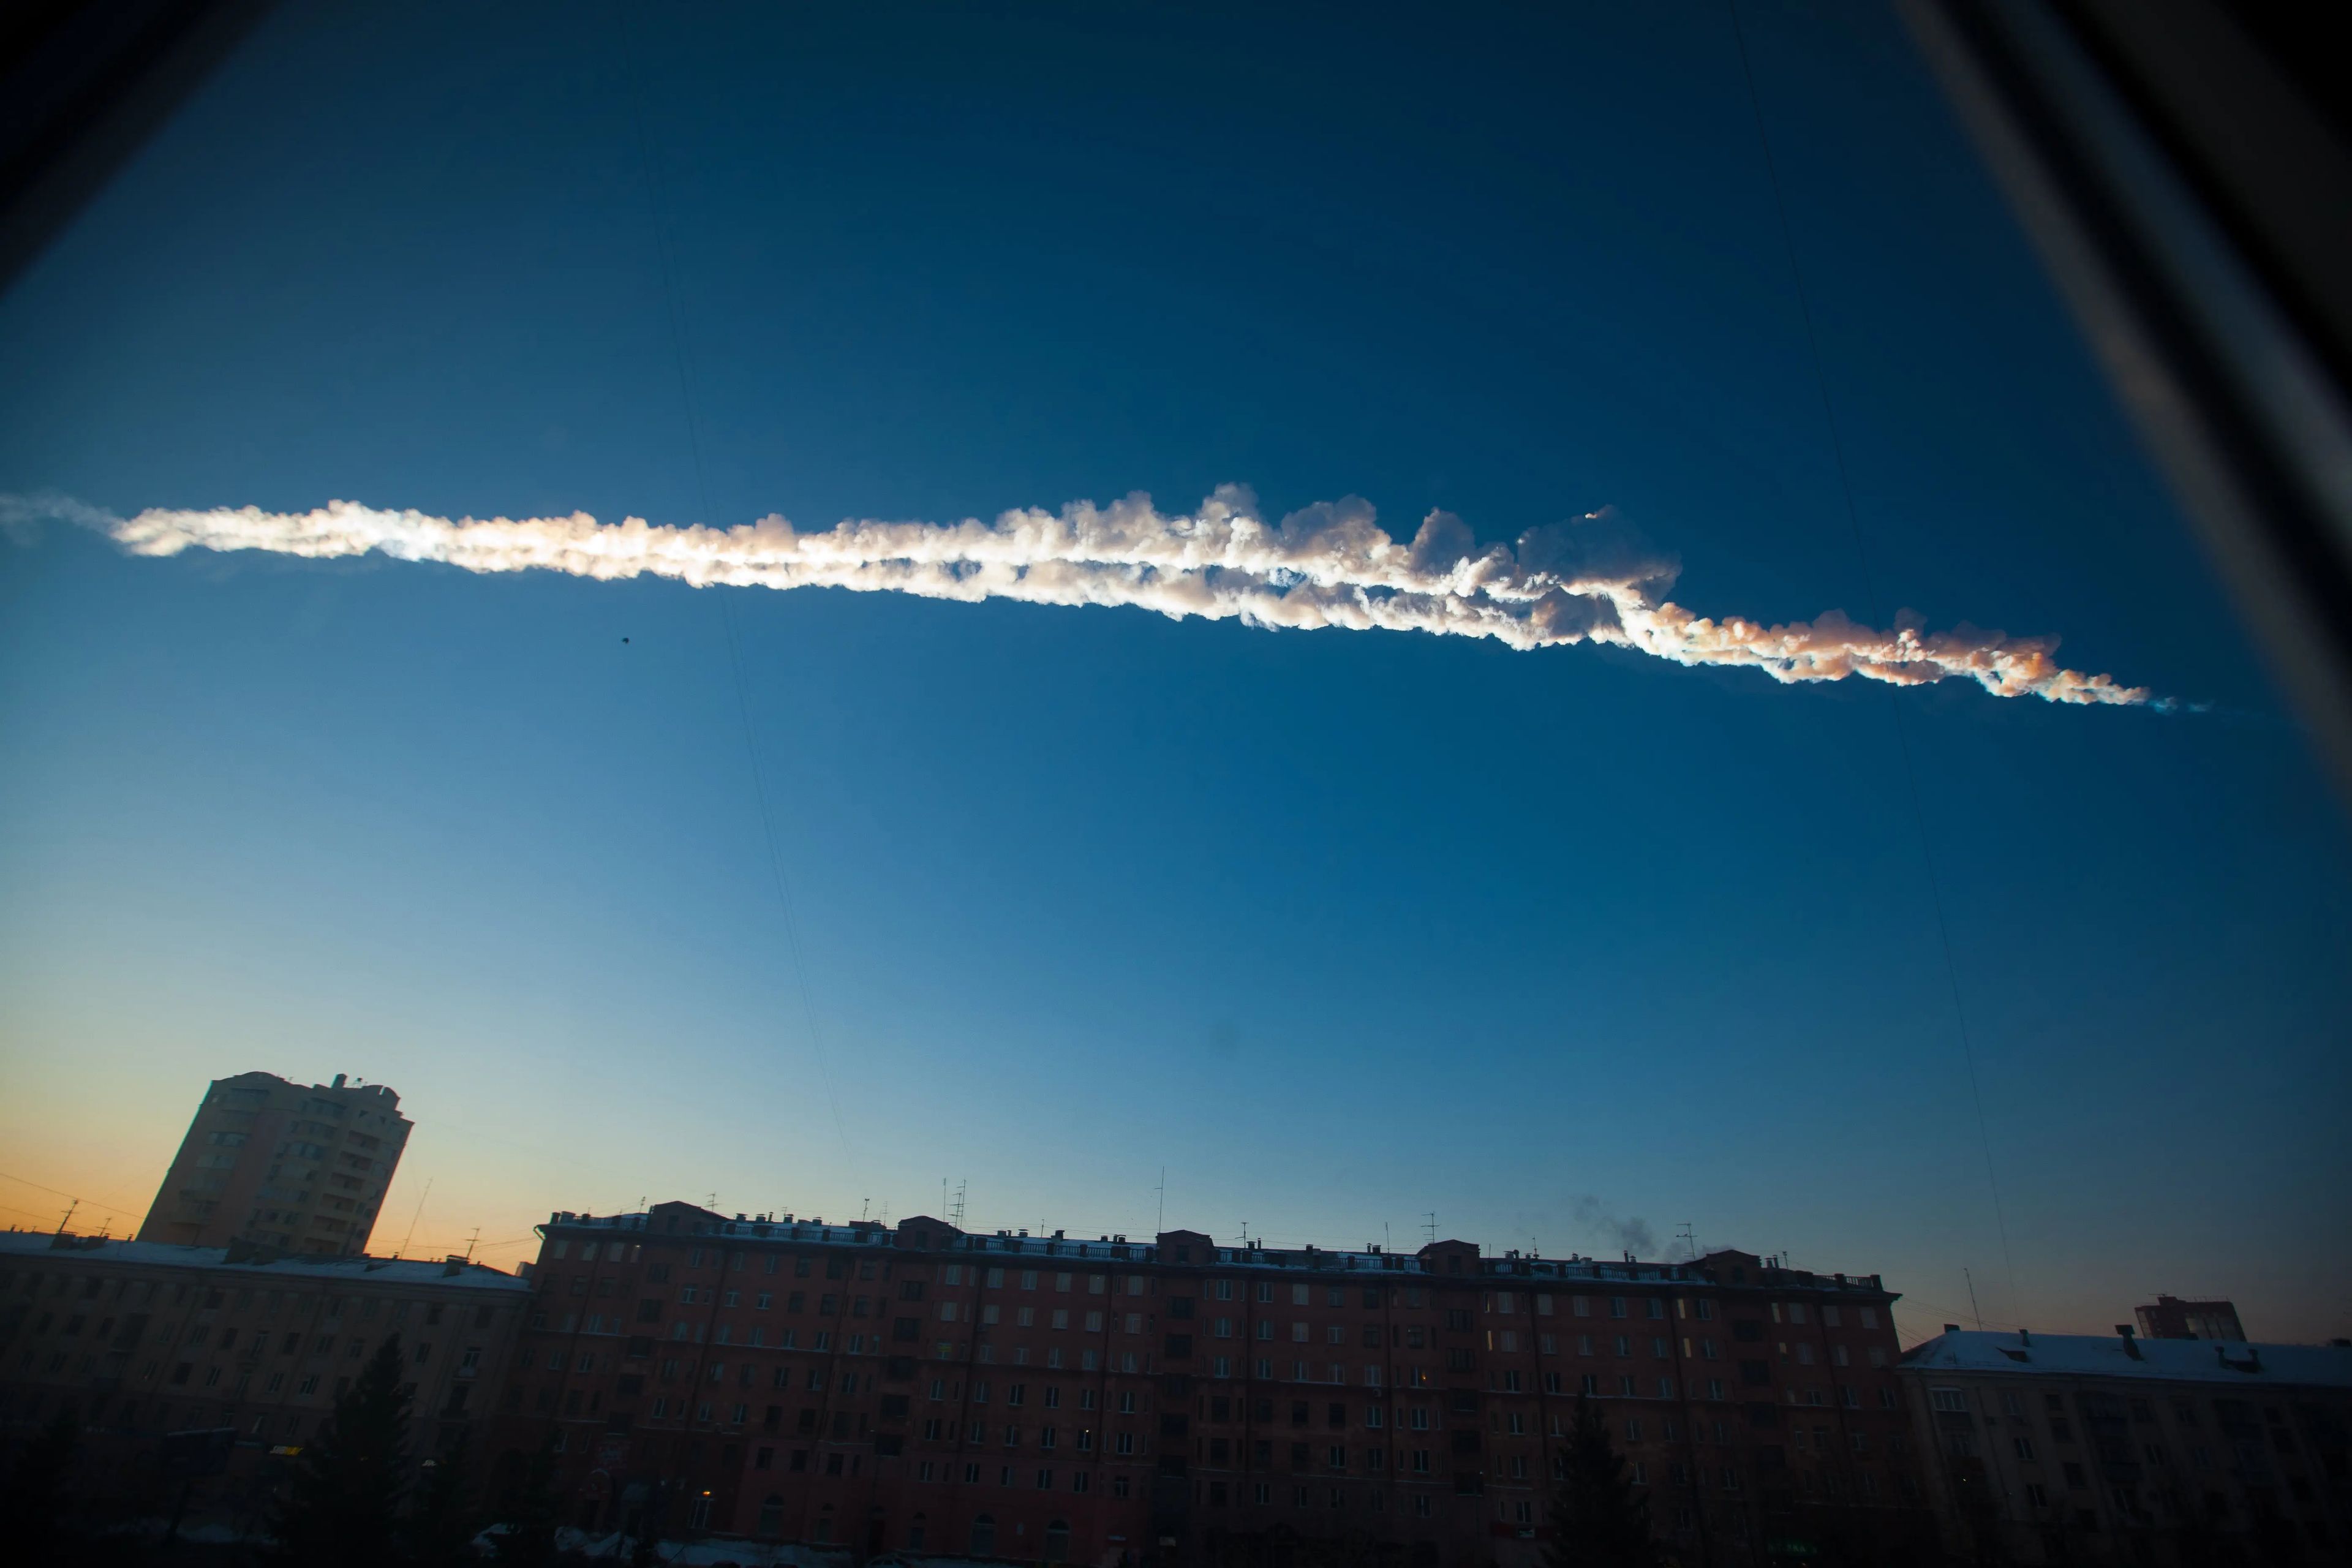 A house-sized asteroid entered the atmosphere above Chelyabinsk, Russia, in 2013.